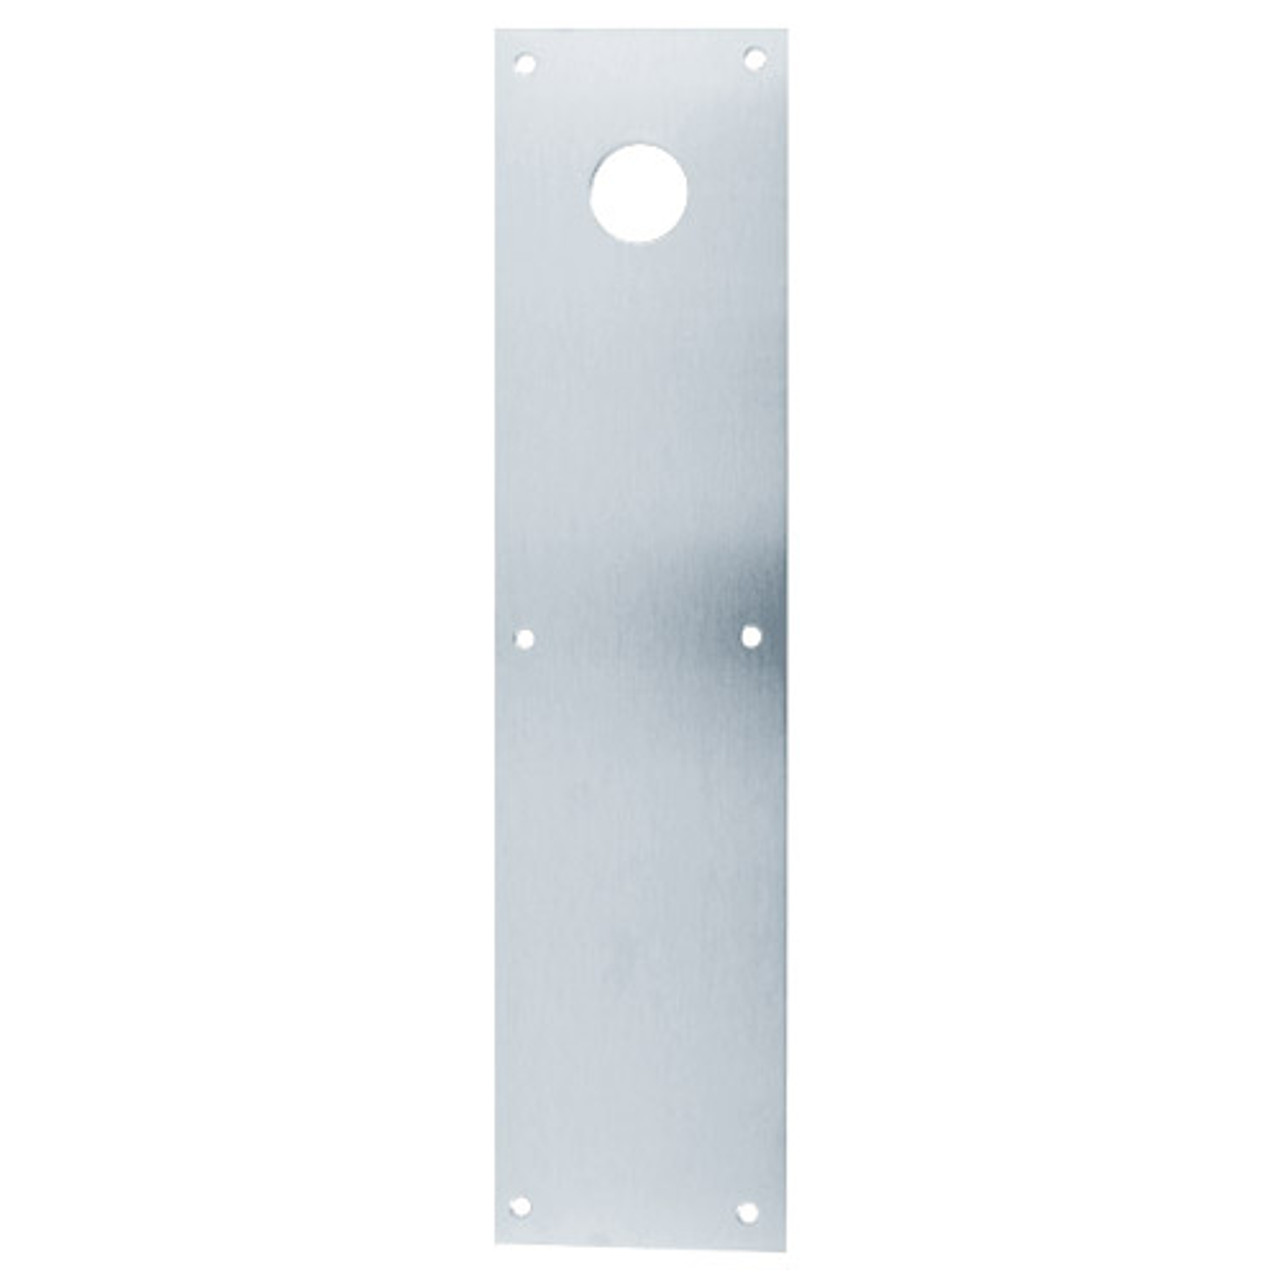 CFK70-629 Don Jo Push Plates with Holes in Bright Stainless Steel Finish